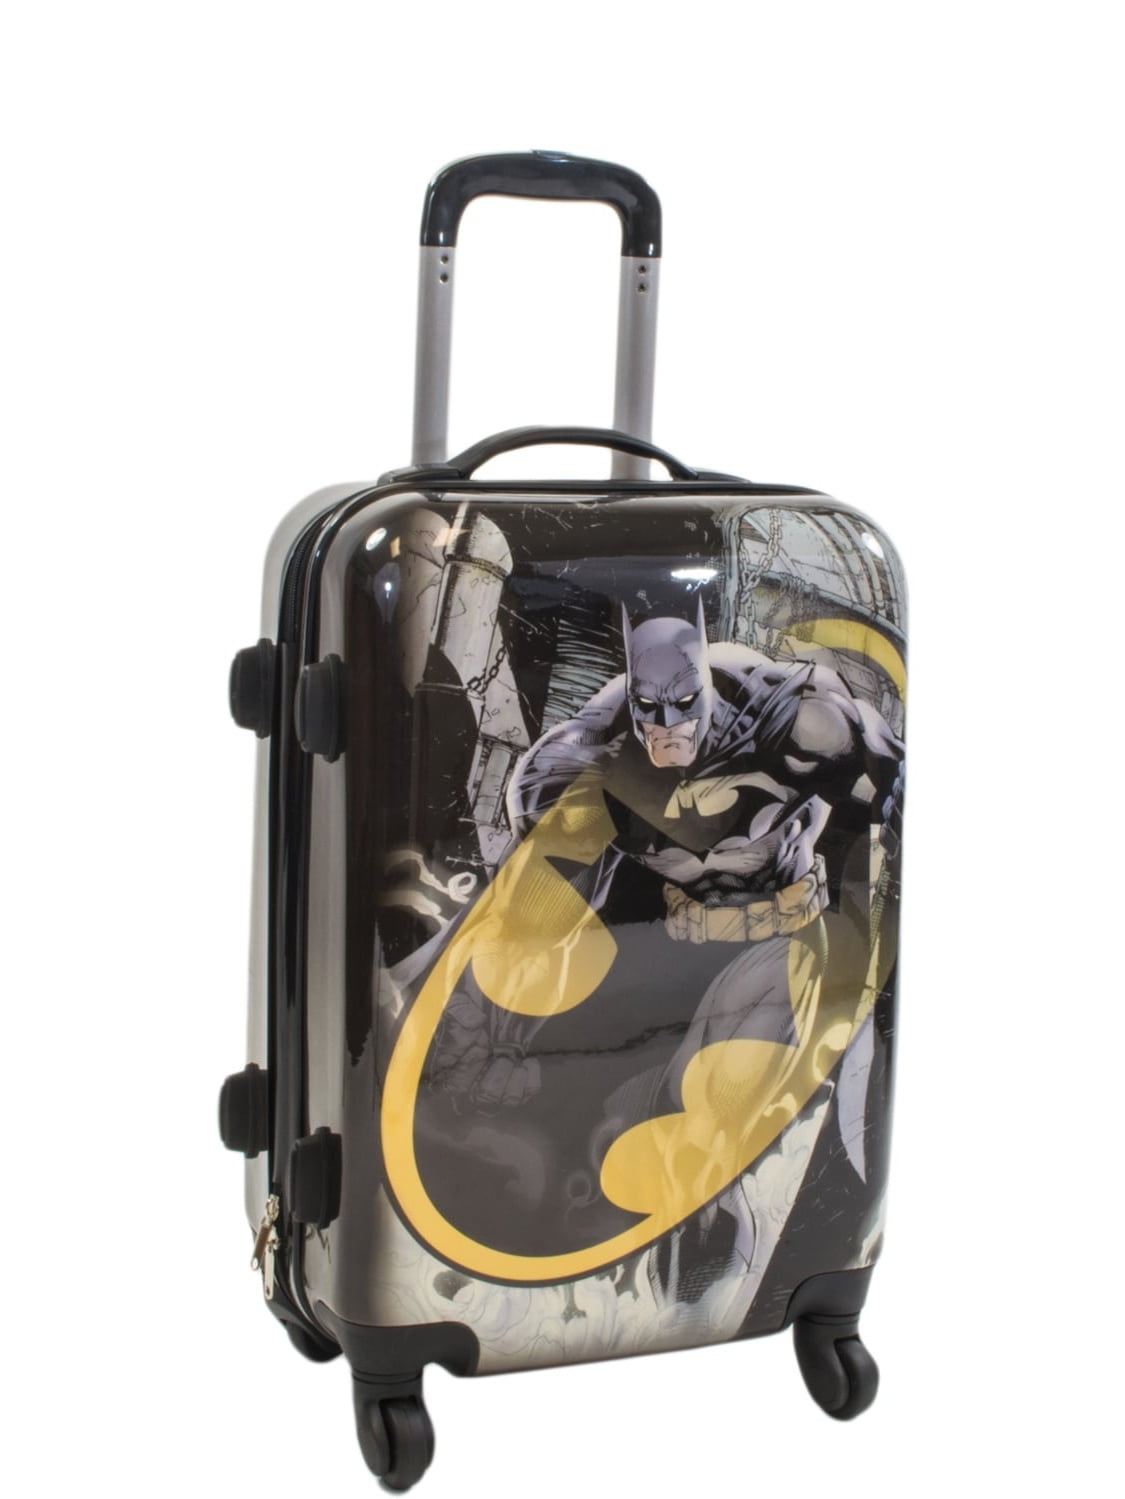 DC Comics Batman 21 inch Spinner Hardside Luggage Carry-on 